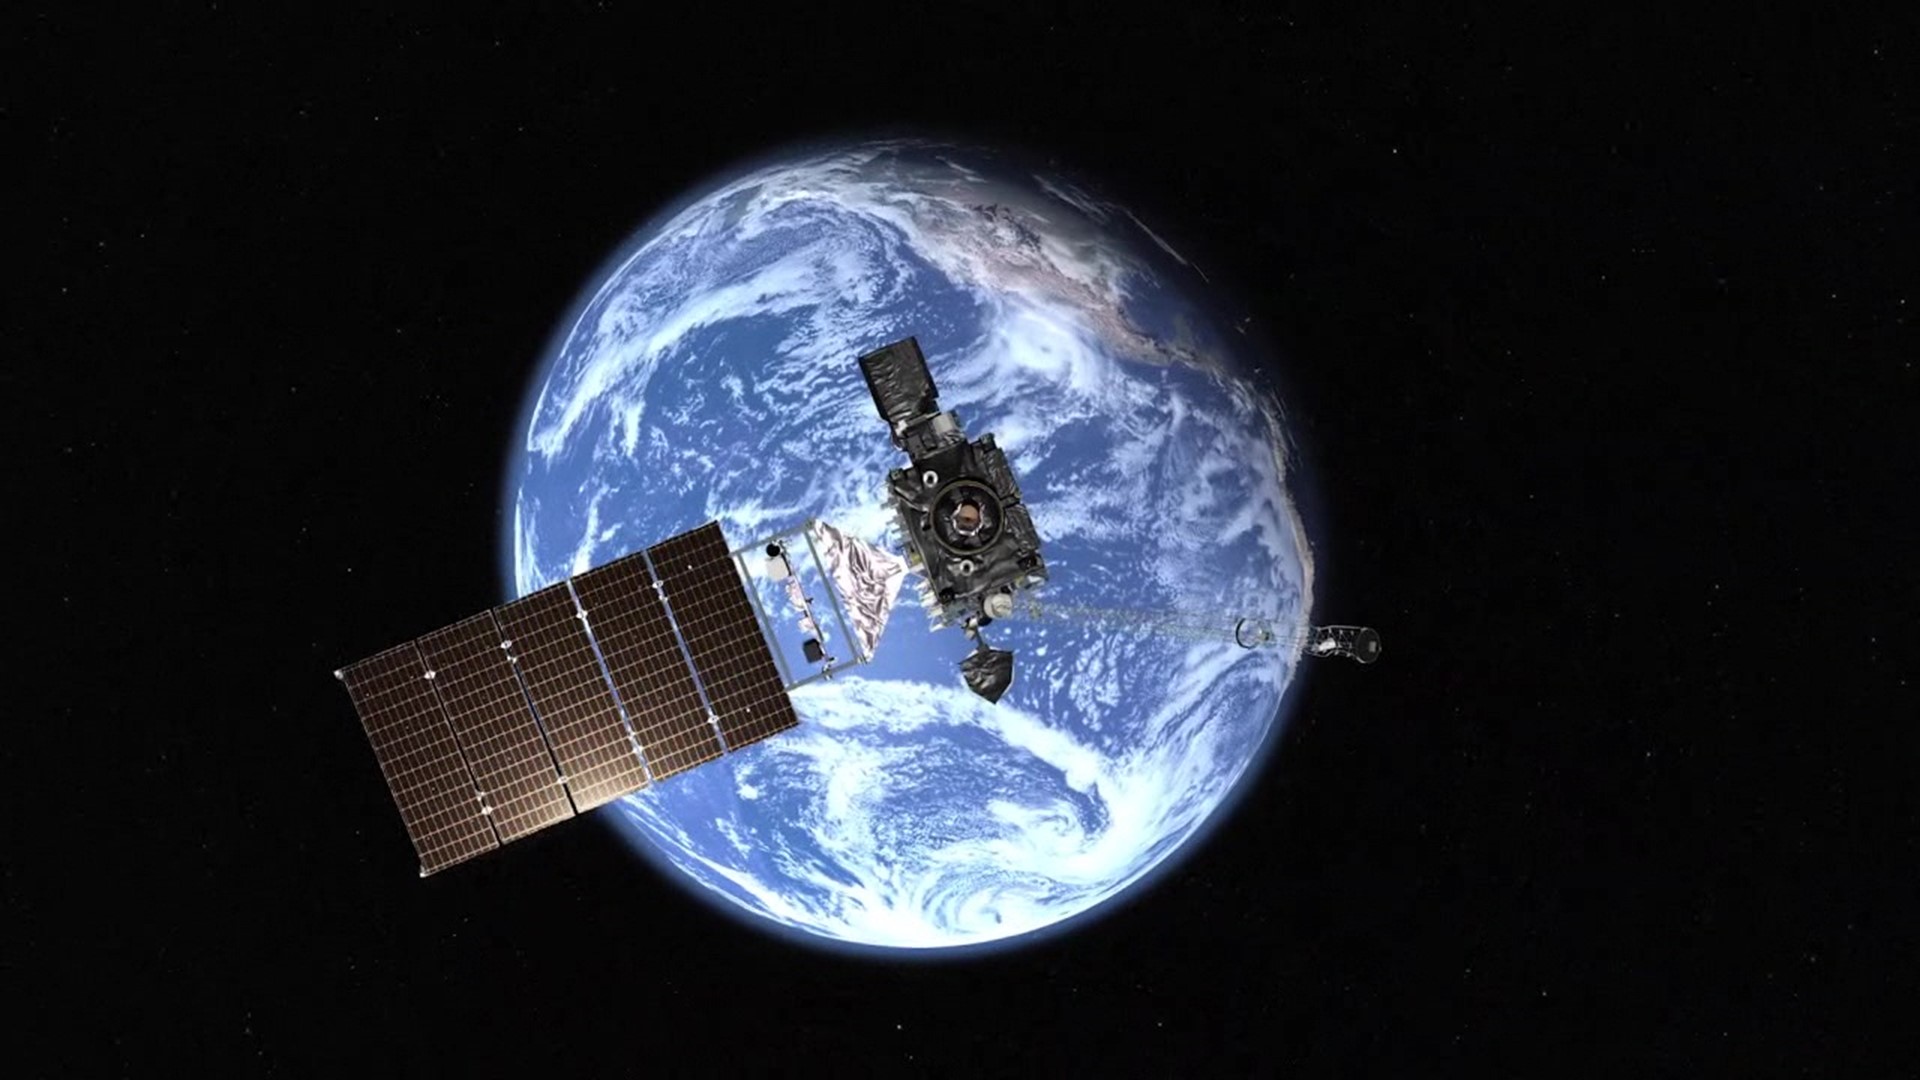 NASA and NOAA launched GOES-T, the newest weather satellite, just after 4:30 p.m. Tuesday.